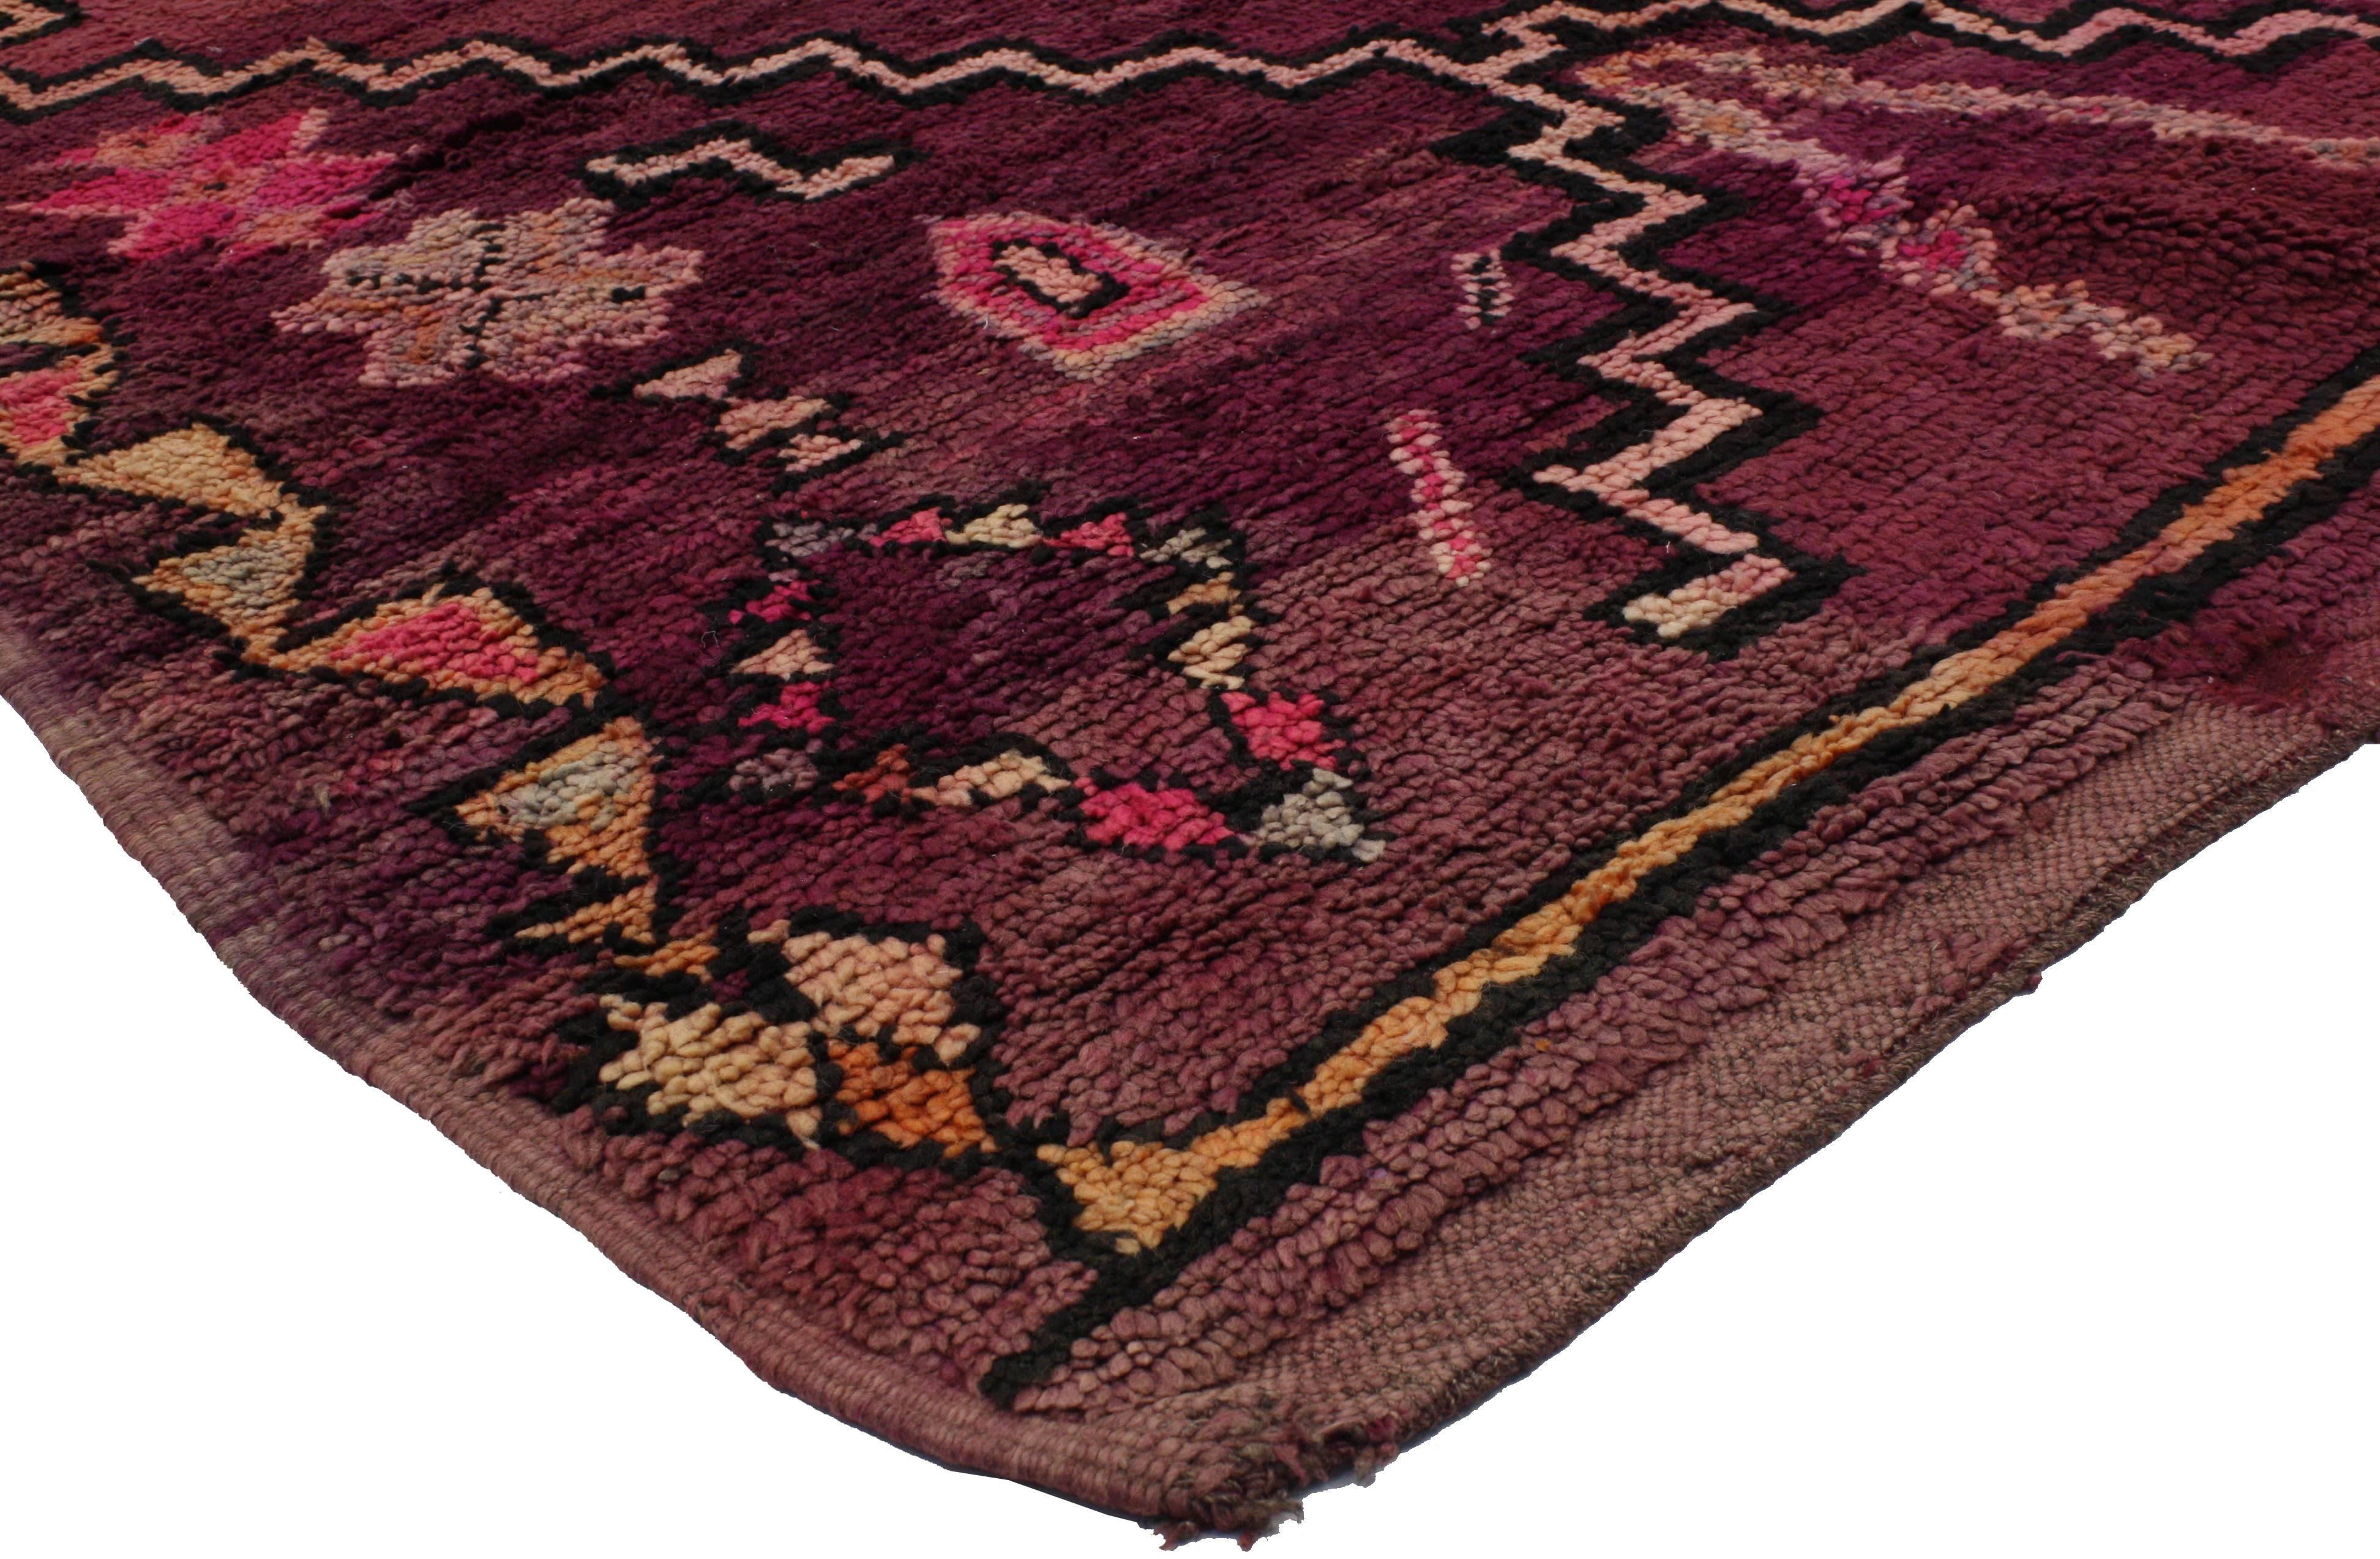 Saturated with good taste and modern tribal style, this vintage Berber Moroccan rug swathed in variegated shades of raspberry, burgundy, maroon, wine, oxblood red, hot pink, plum, purple, lavender, orange, gray, black, brown and beige. Everything